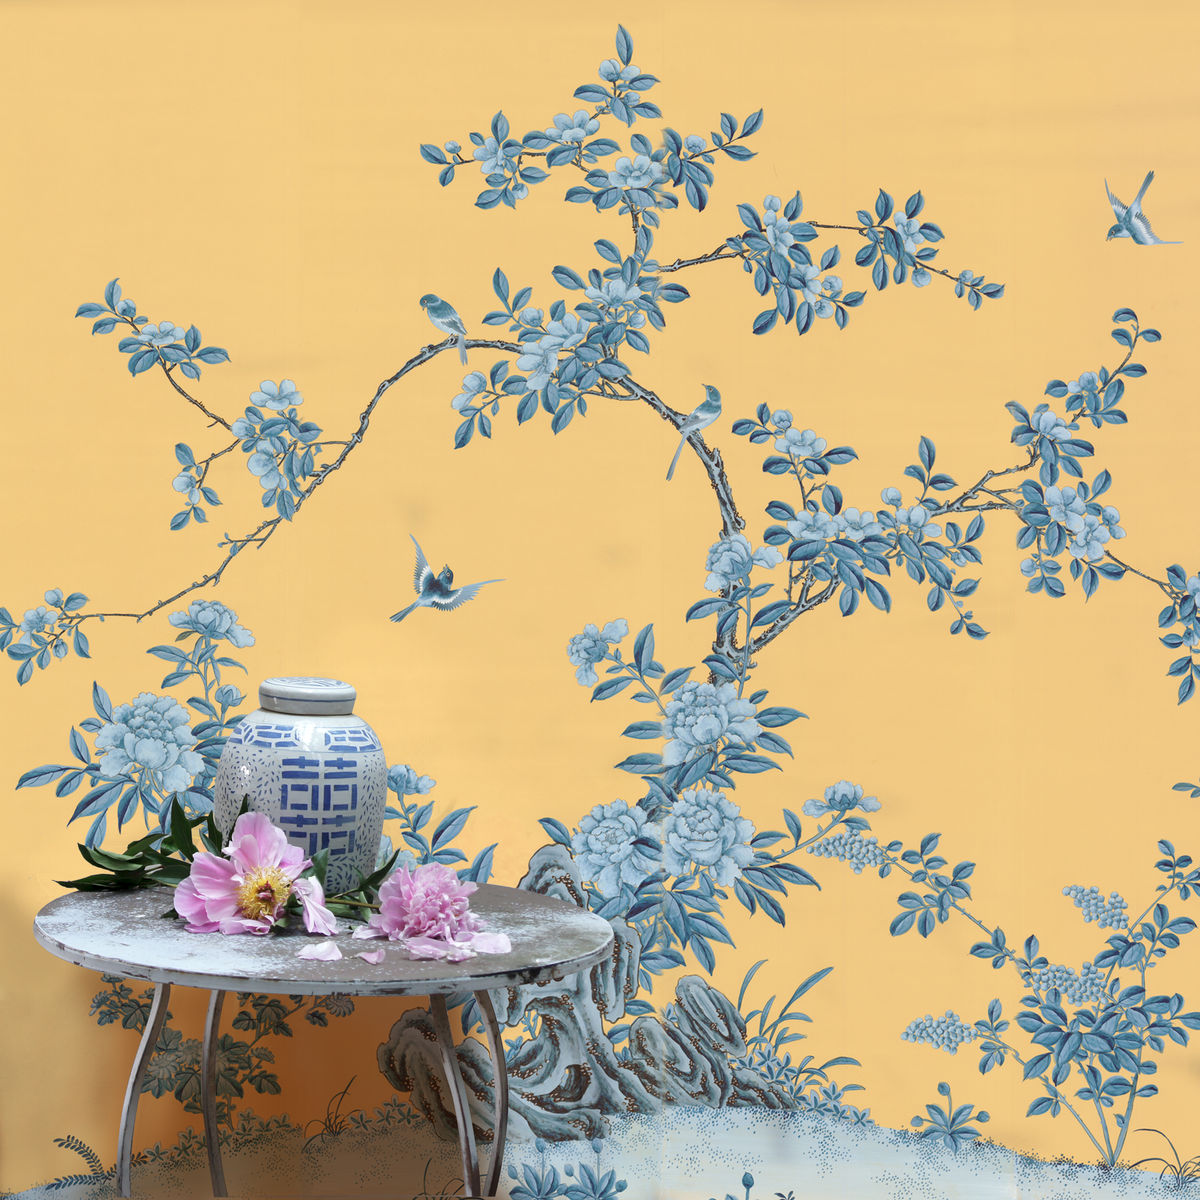 The Chinese Tree Chinoiserie Wallpaper Product Image Of